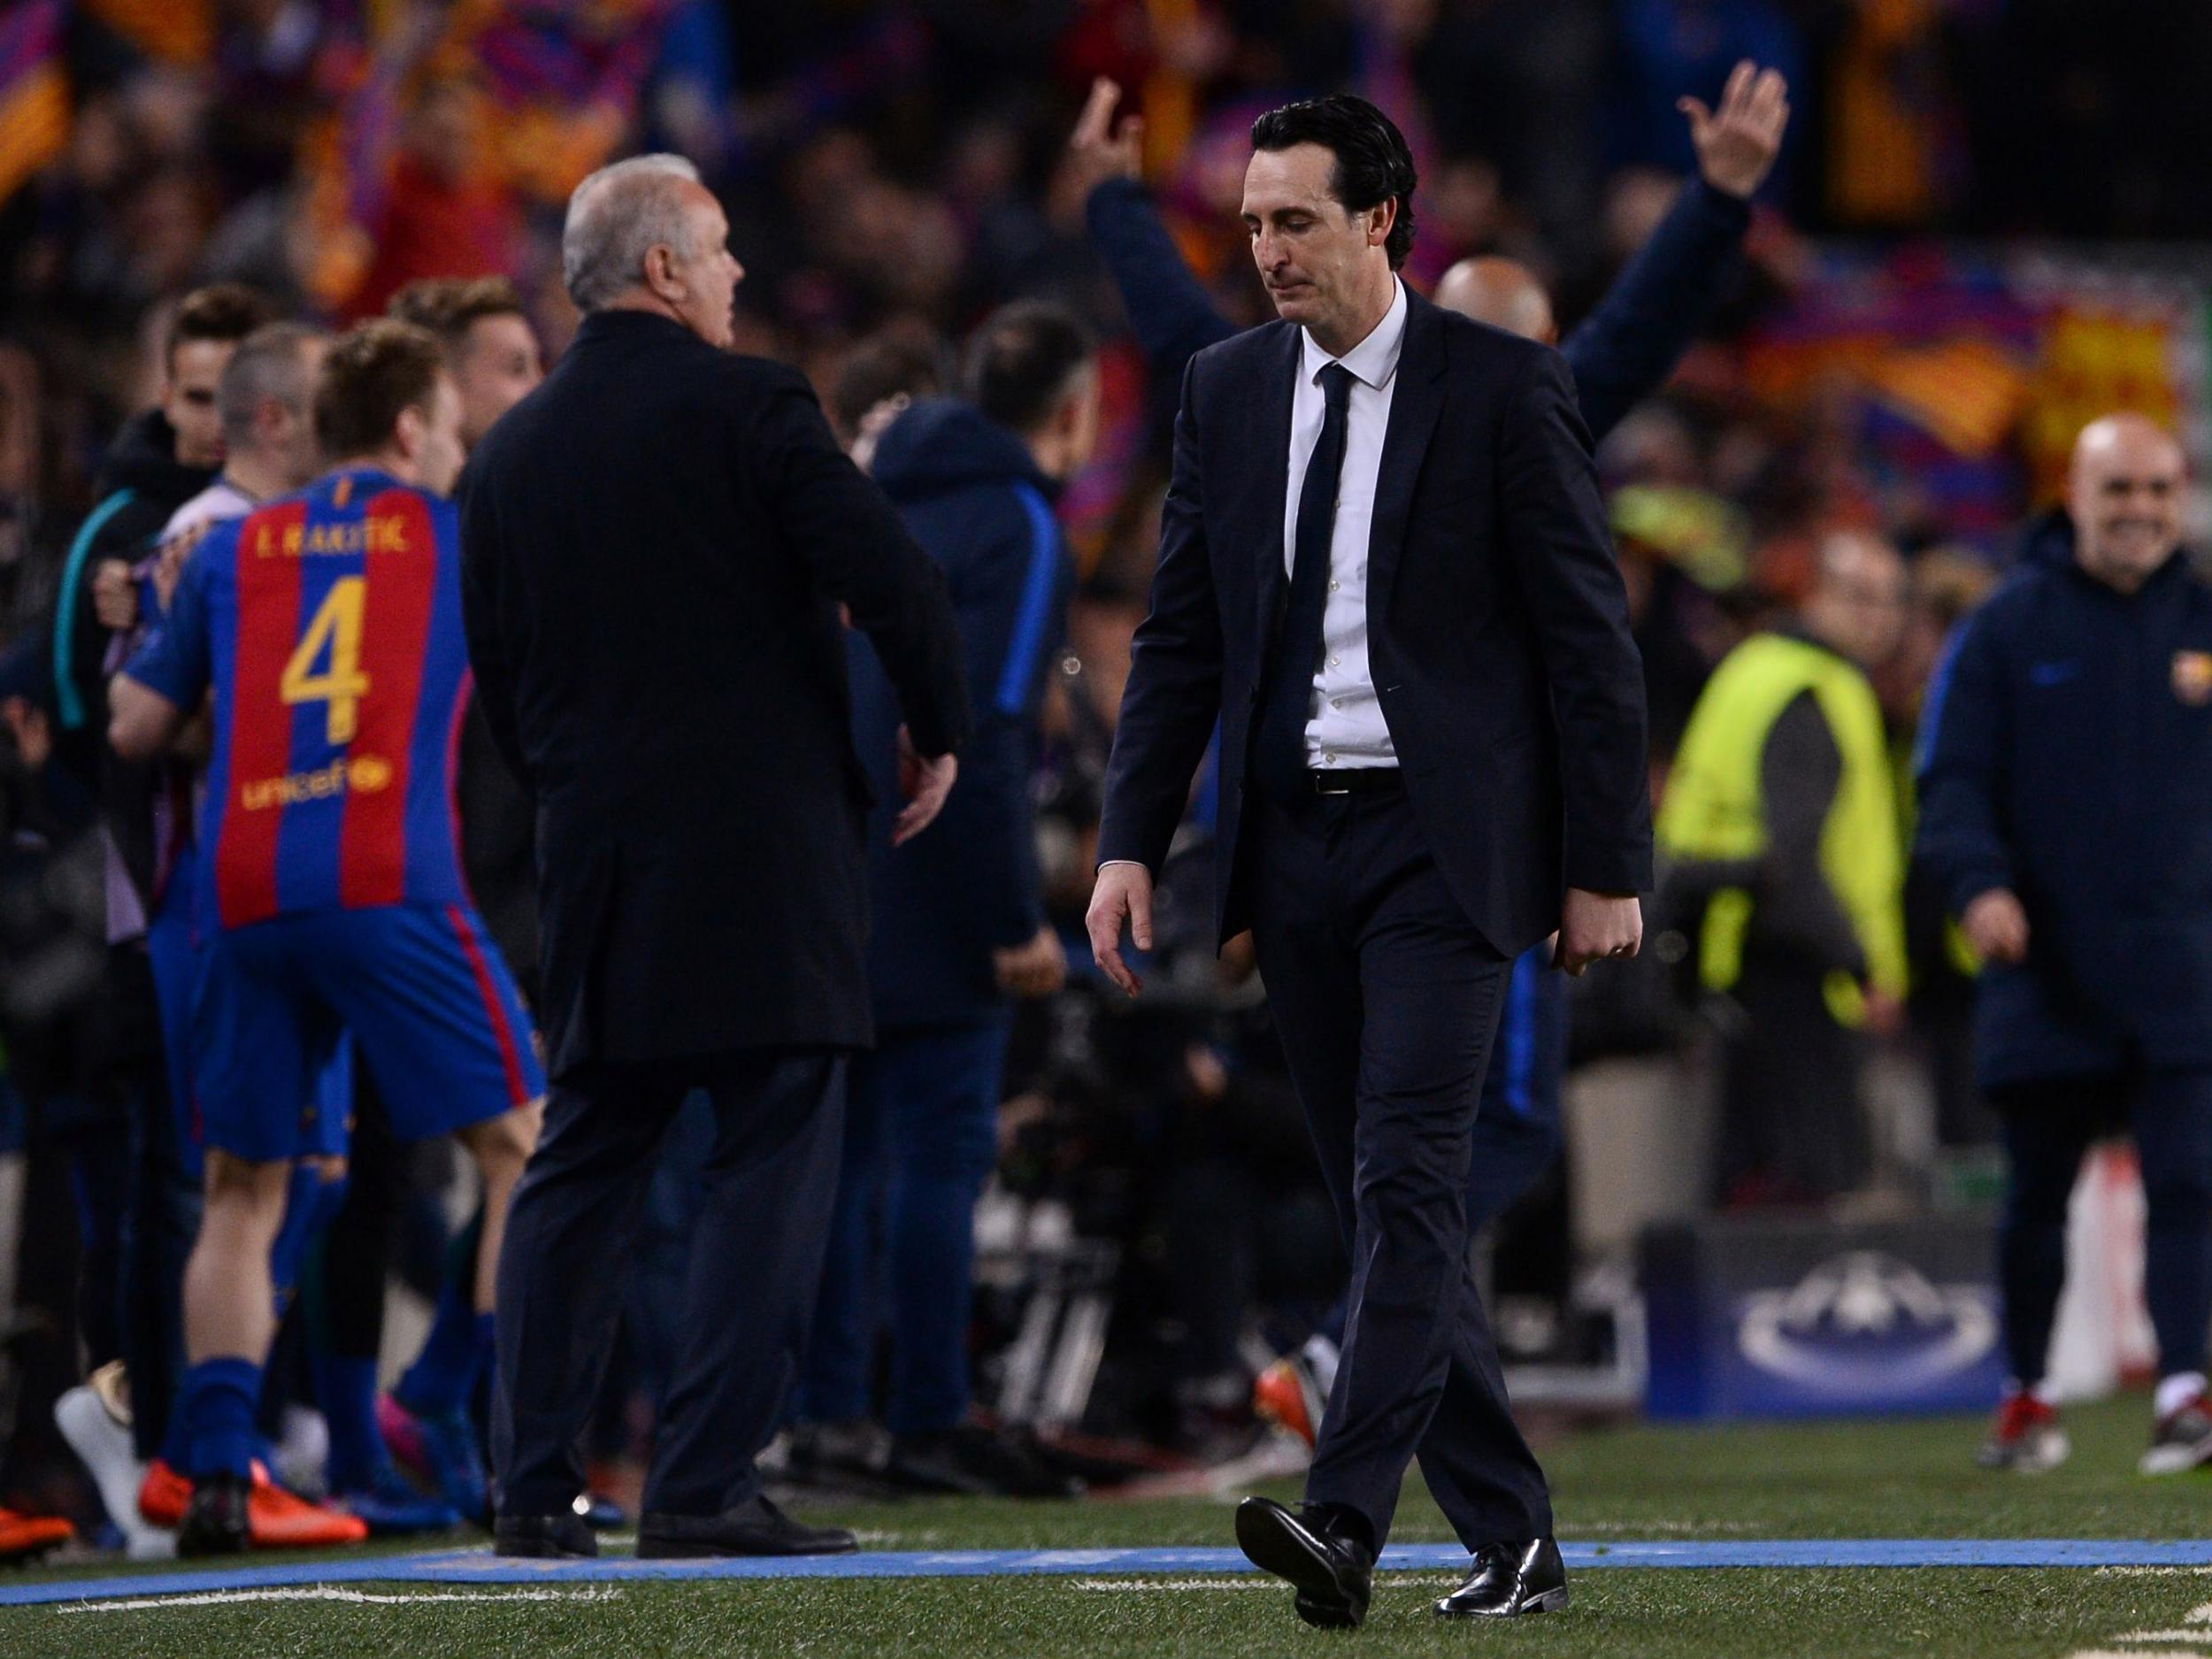 Barcelona completed one of the greatest comebacks of all time at the Nou Camp